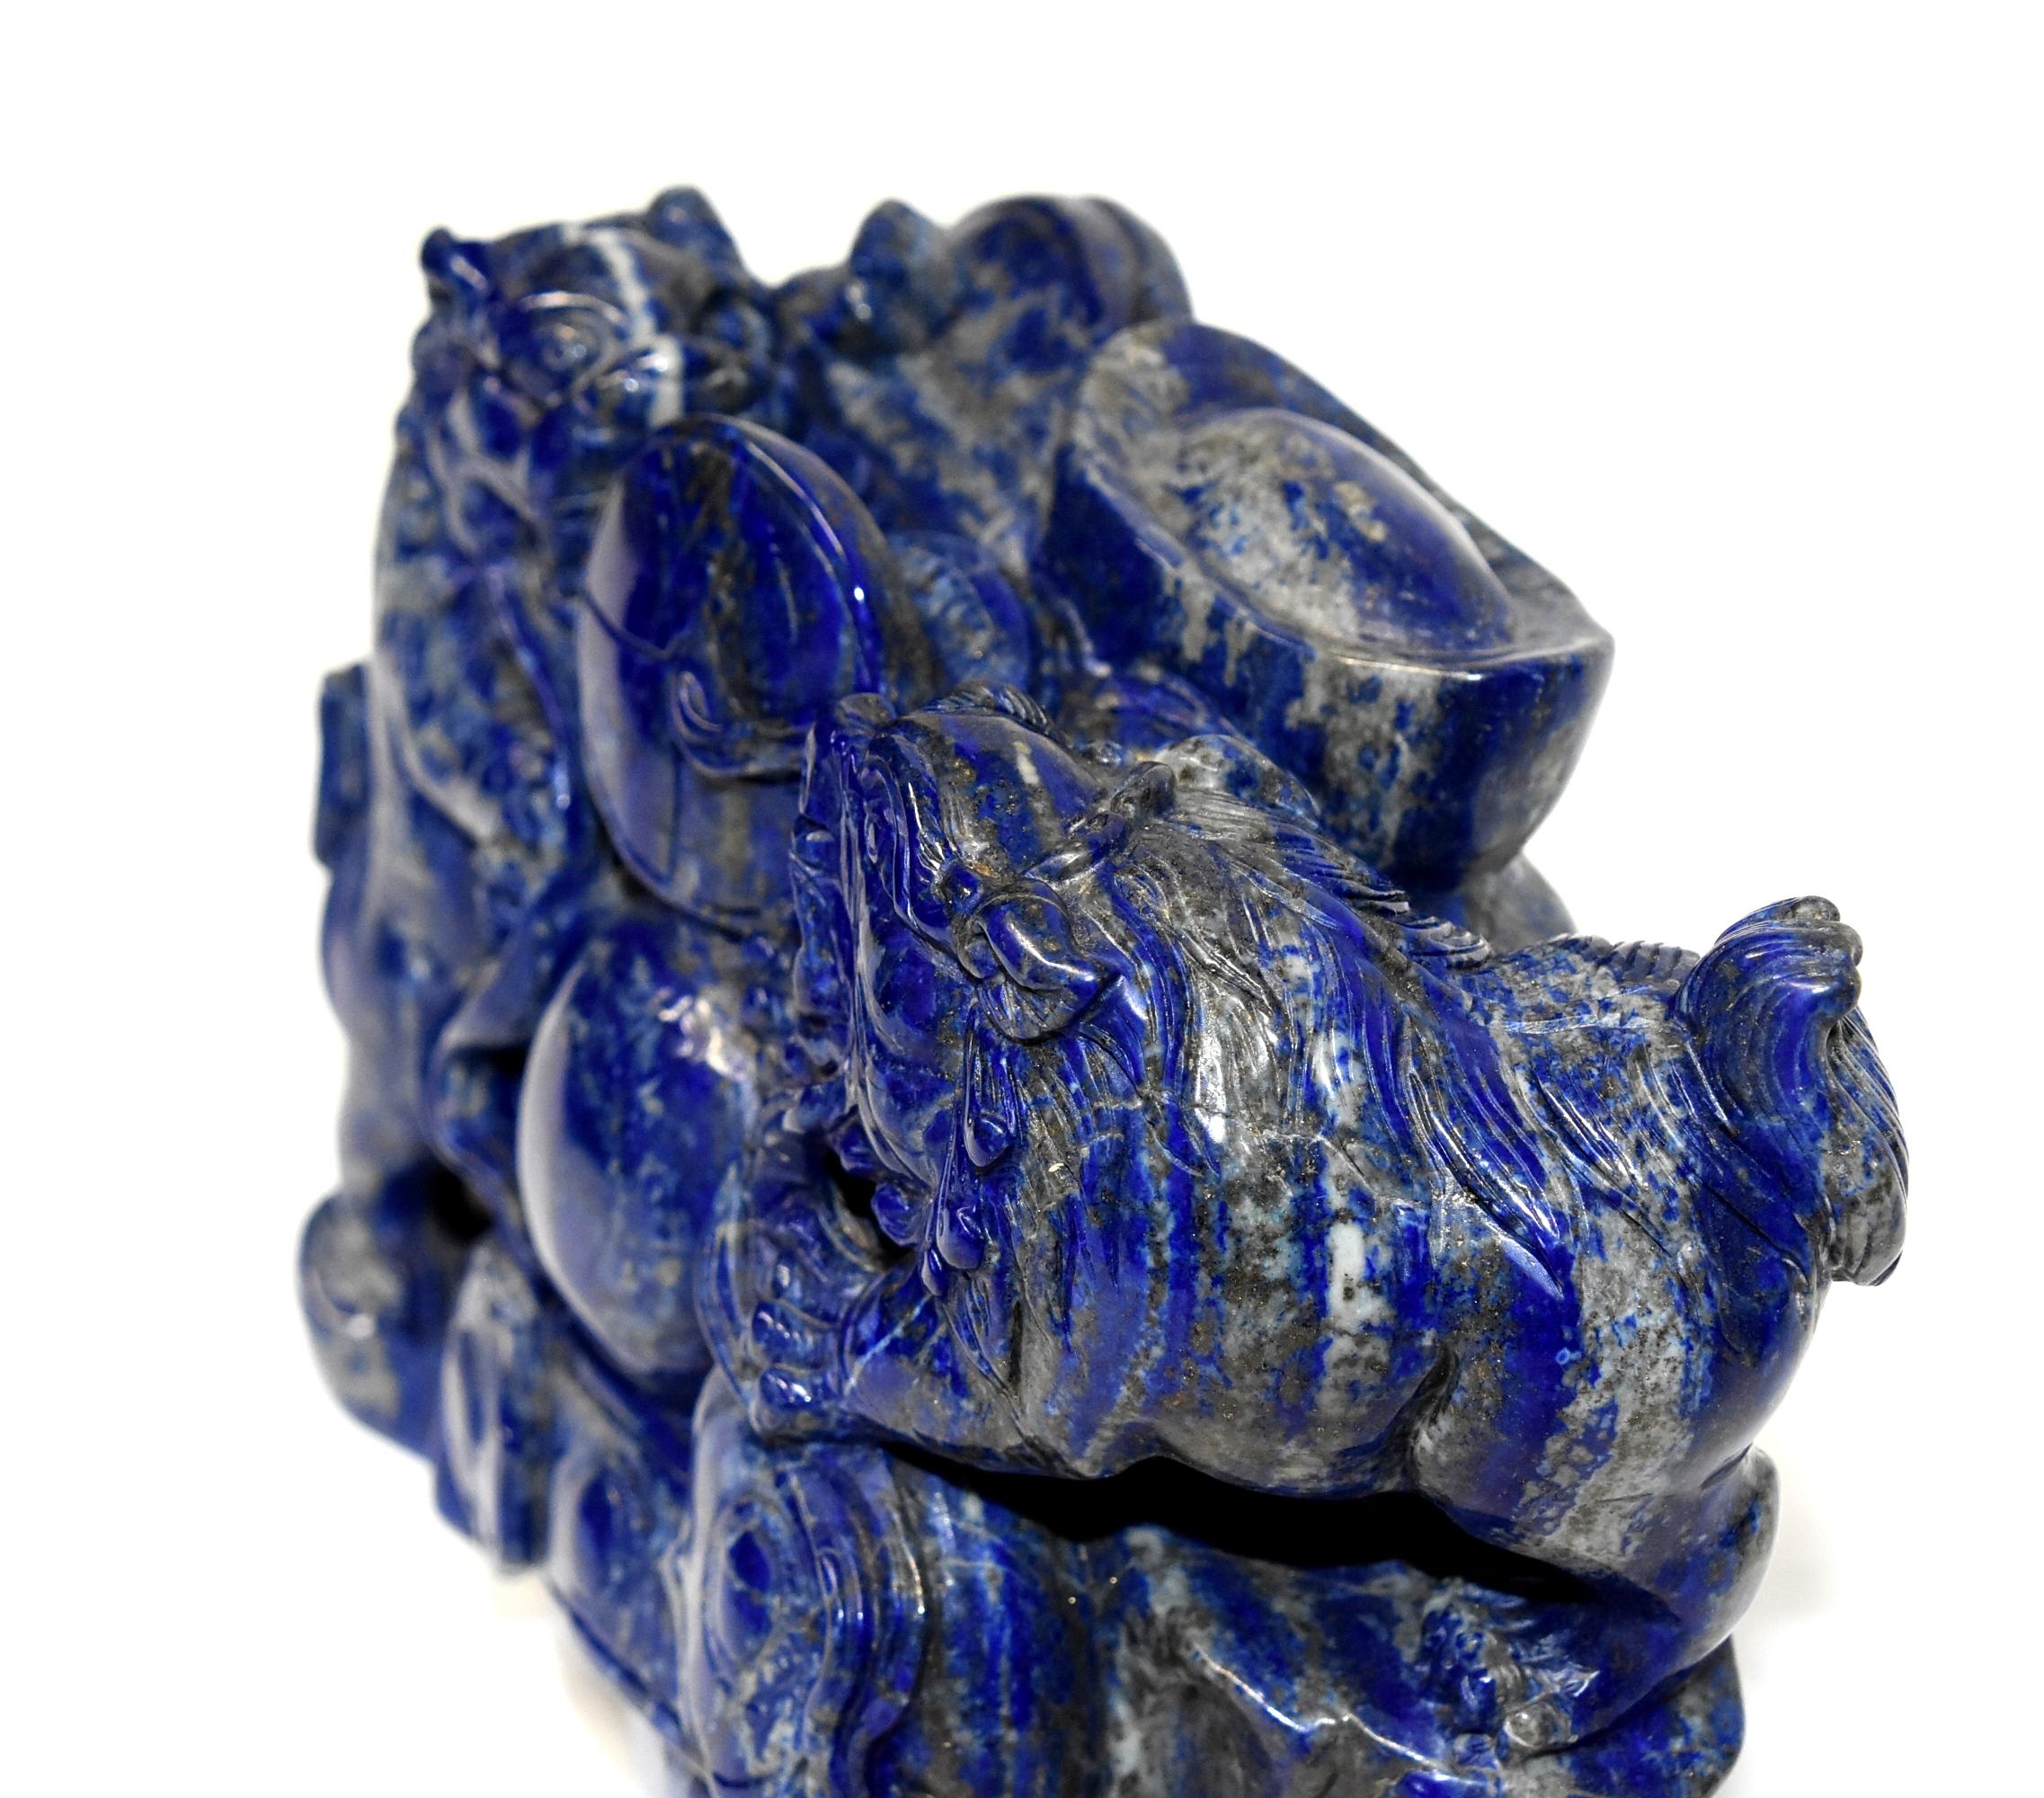 Natural Lapis Lazuli 8 lb Block with Carved Lions 10